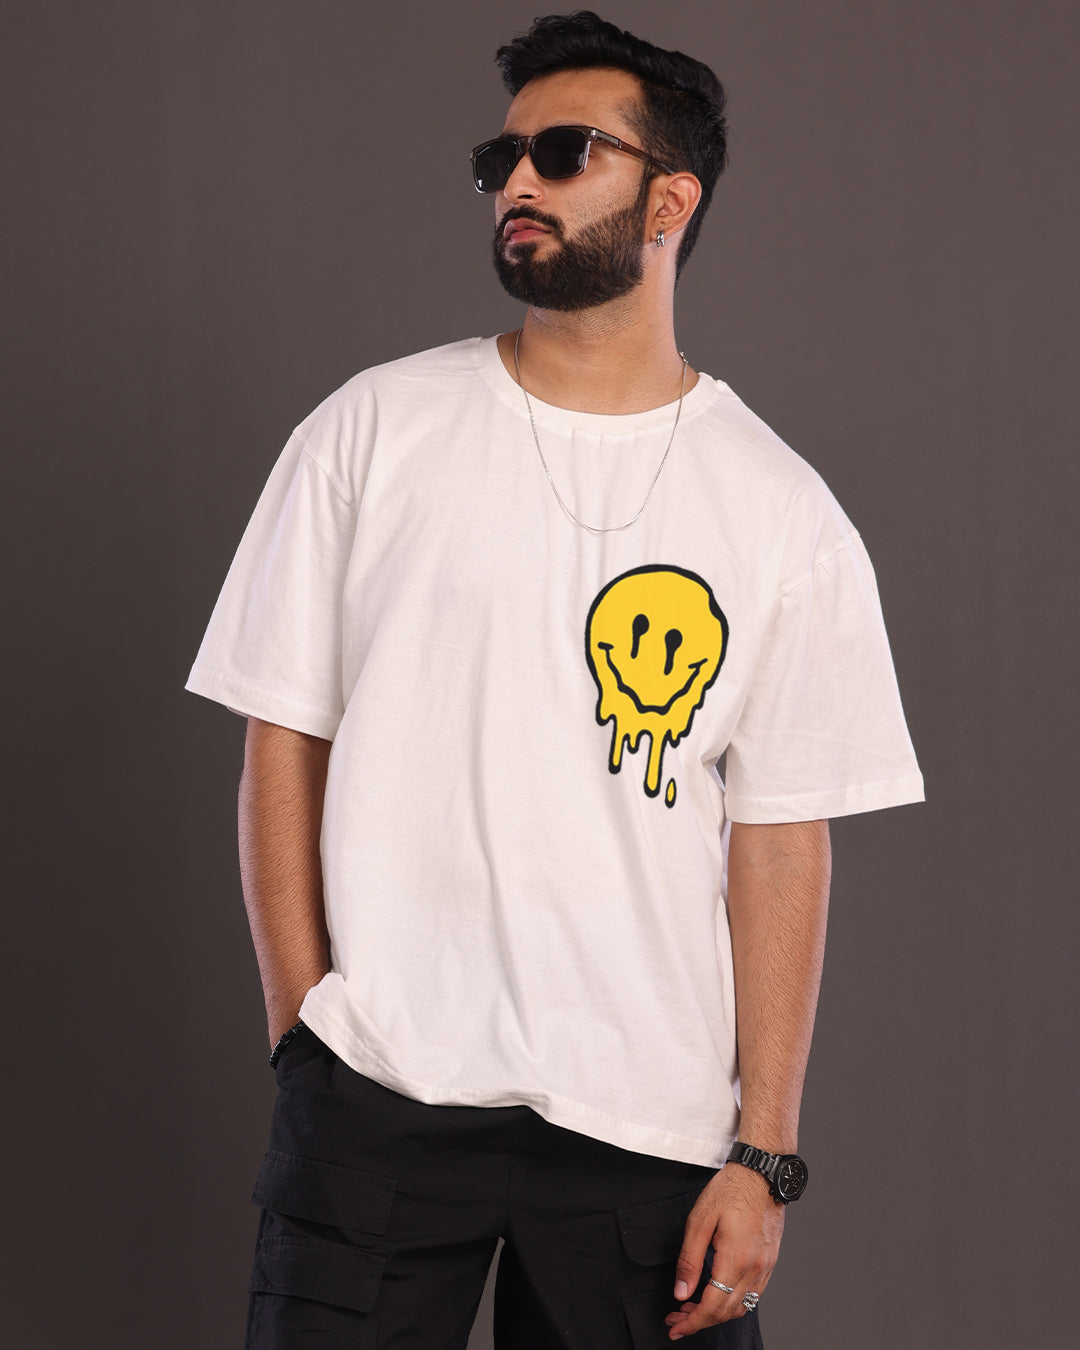 Spread Joy: Male Oversized White T-Shirt - Smiley Edition